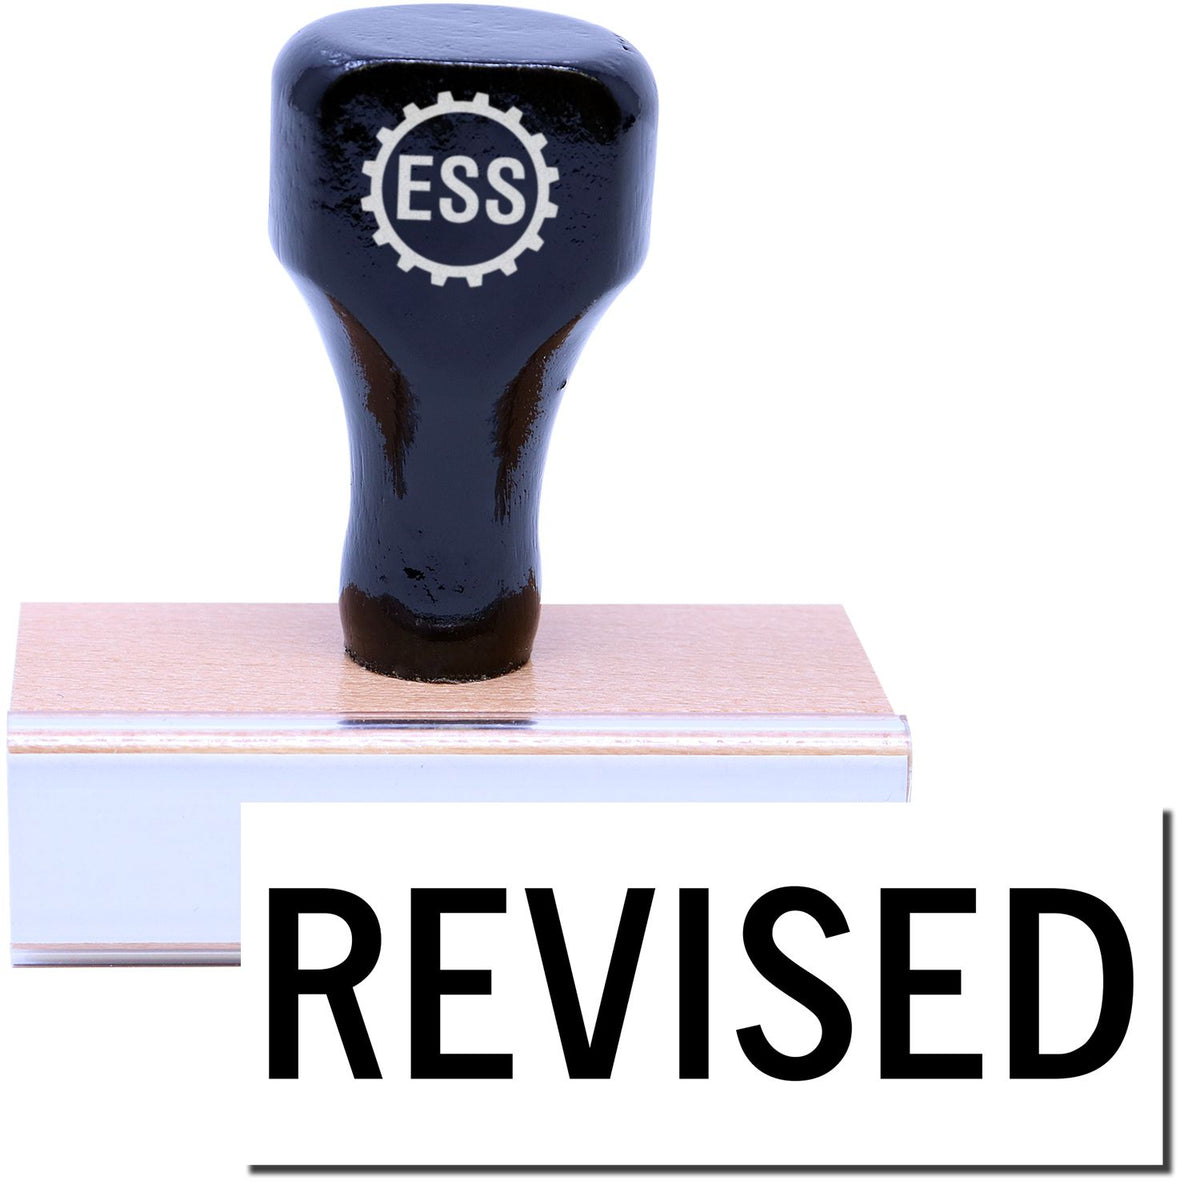 A stock office rubber stamp with a stamped image showing how the text &quot;REVISED&quot; in a large font is displayed after stamping.